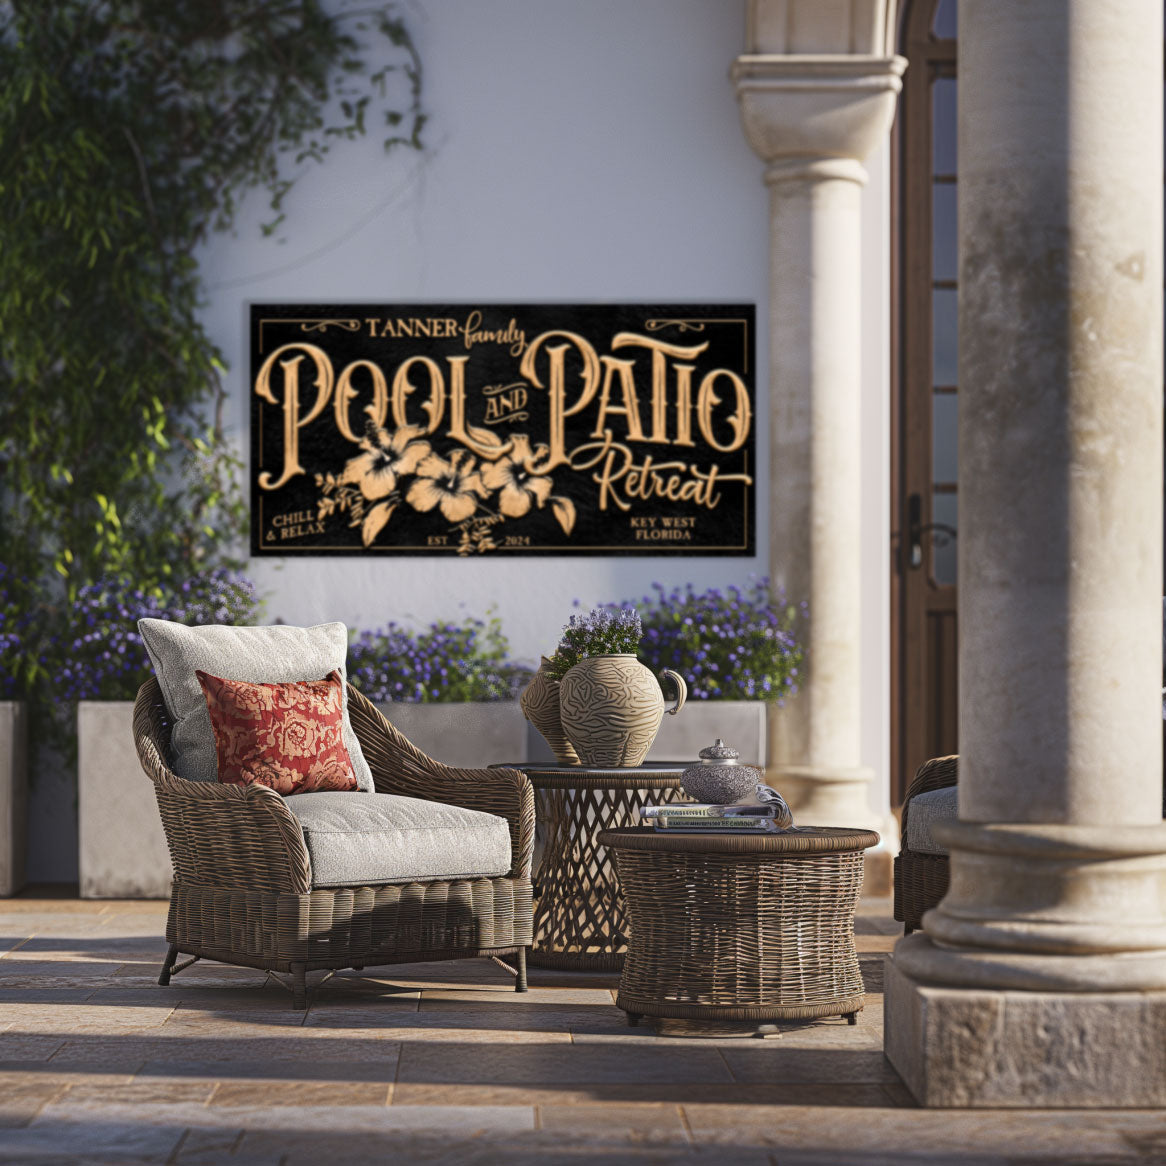 Pool wall decor sign that is on black textured background with the words Pool and Patio display large with flowers underneath and personalization of name and city and state.